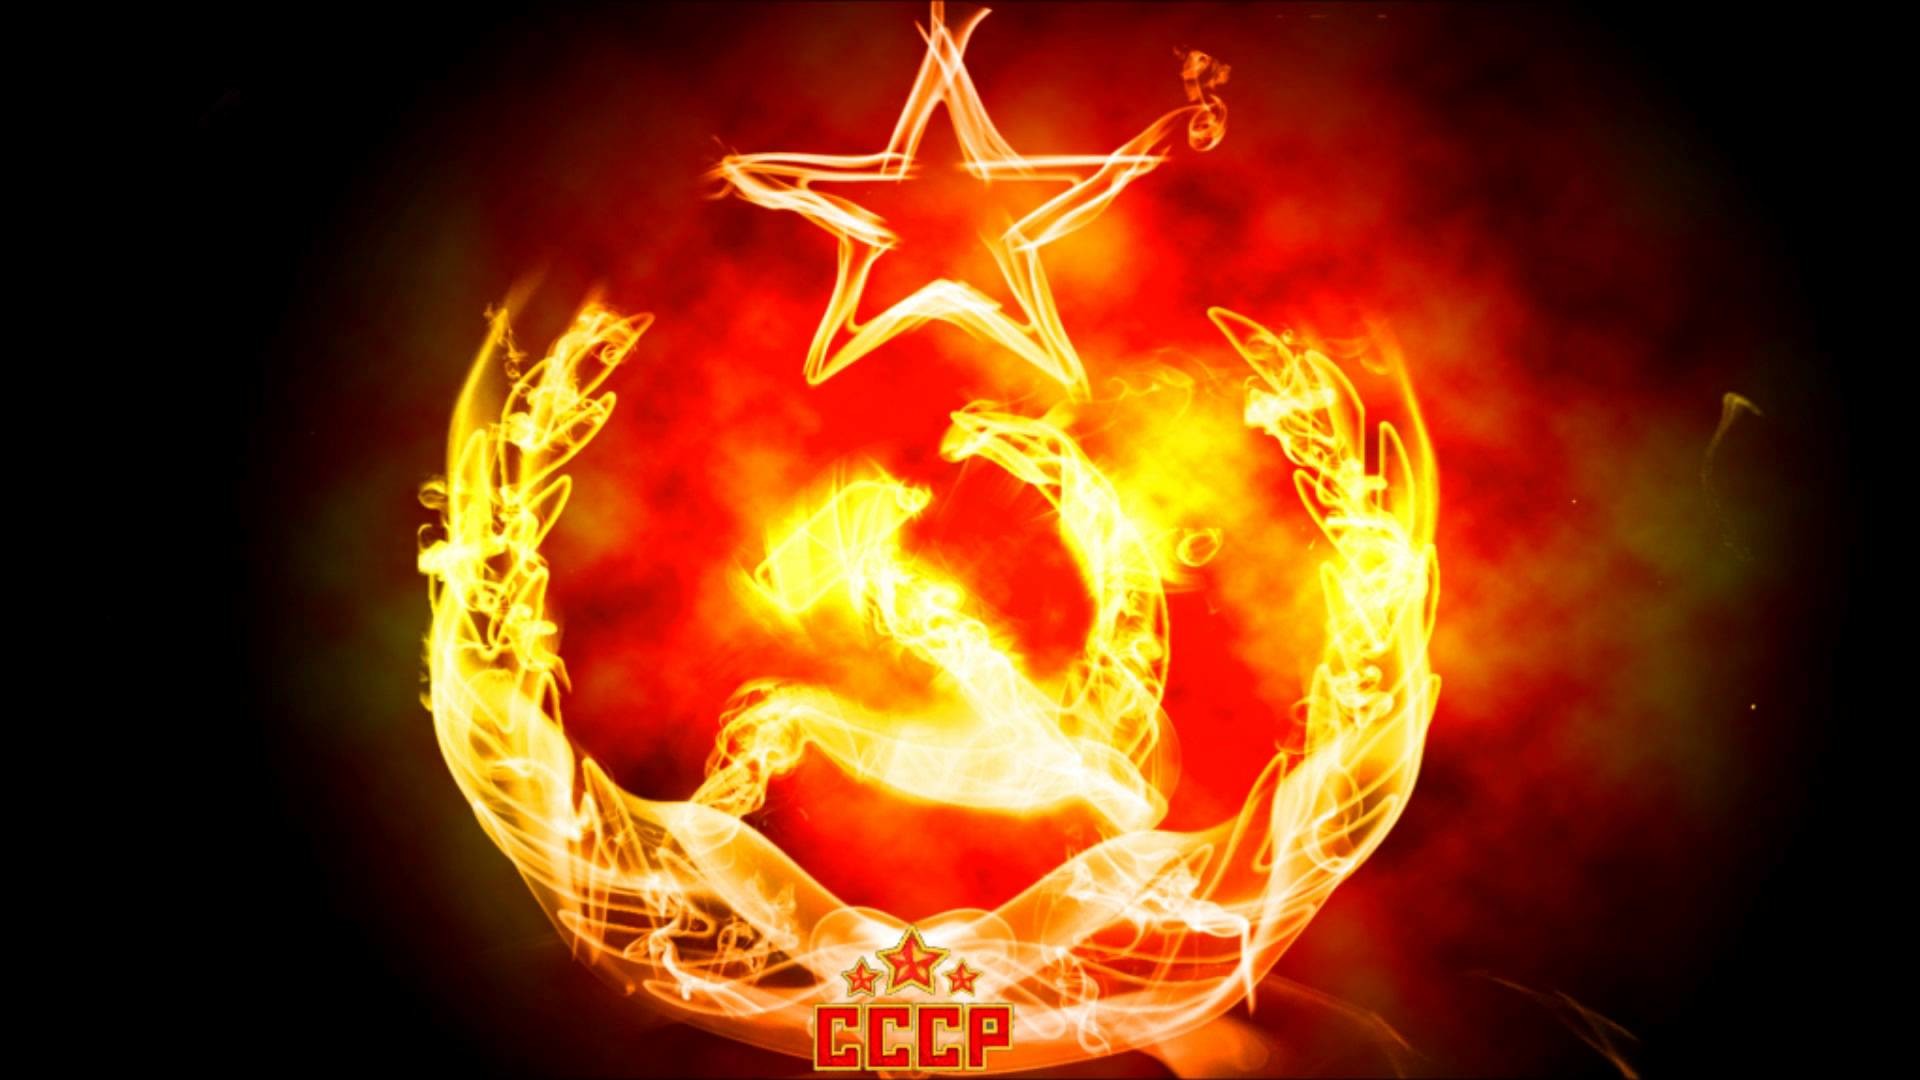 1920x1080 RED ARMY CHOIR RED ARMY IS THE STRONGEST ÐÑÐ°ÑÐ½Ð°Ñ ÐÑÐ¼Ð¸Ñ ÑÐ¸Ð»ÑÐ½ÑÐ¹